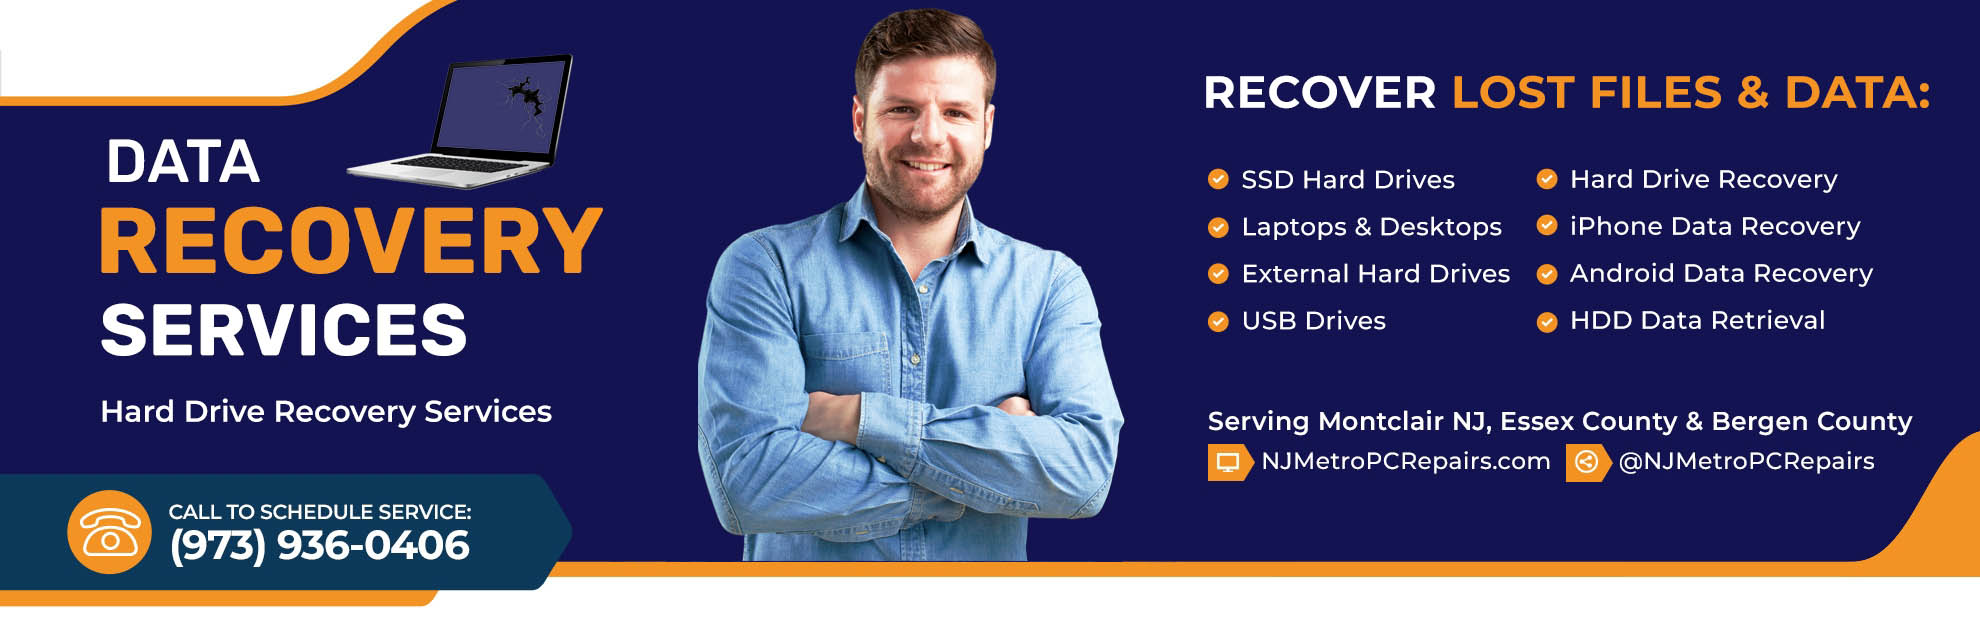 Banner Image with Confident Smiling Computer Repair Technician and A List Of Data Recovery Services